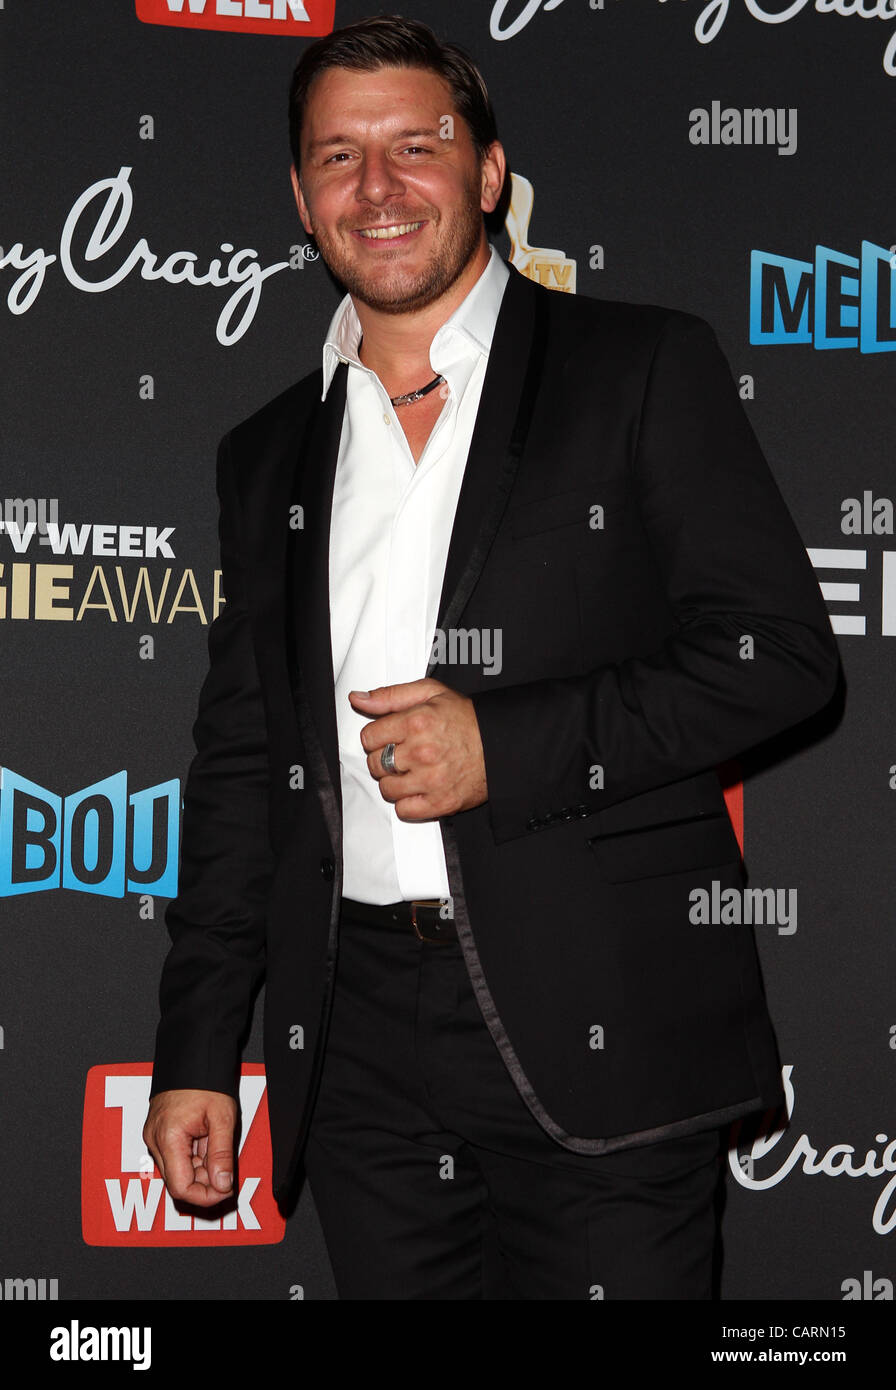 April 15, 2012 - Melbourne, NSW, Australia - Chef MANI FEIDEL arrives at the 2012 TV Week Logie Awards in Melbourne at the Crown Casino (Credit Image: © Marianna Massey/ZUMAPRESS.com) Stock Photo